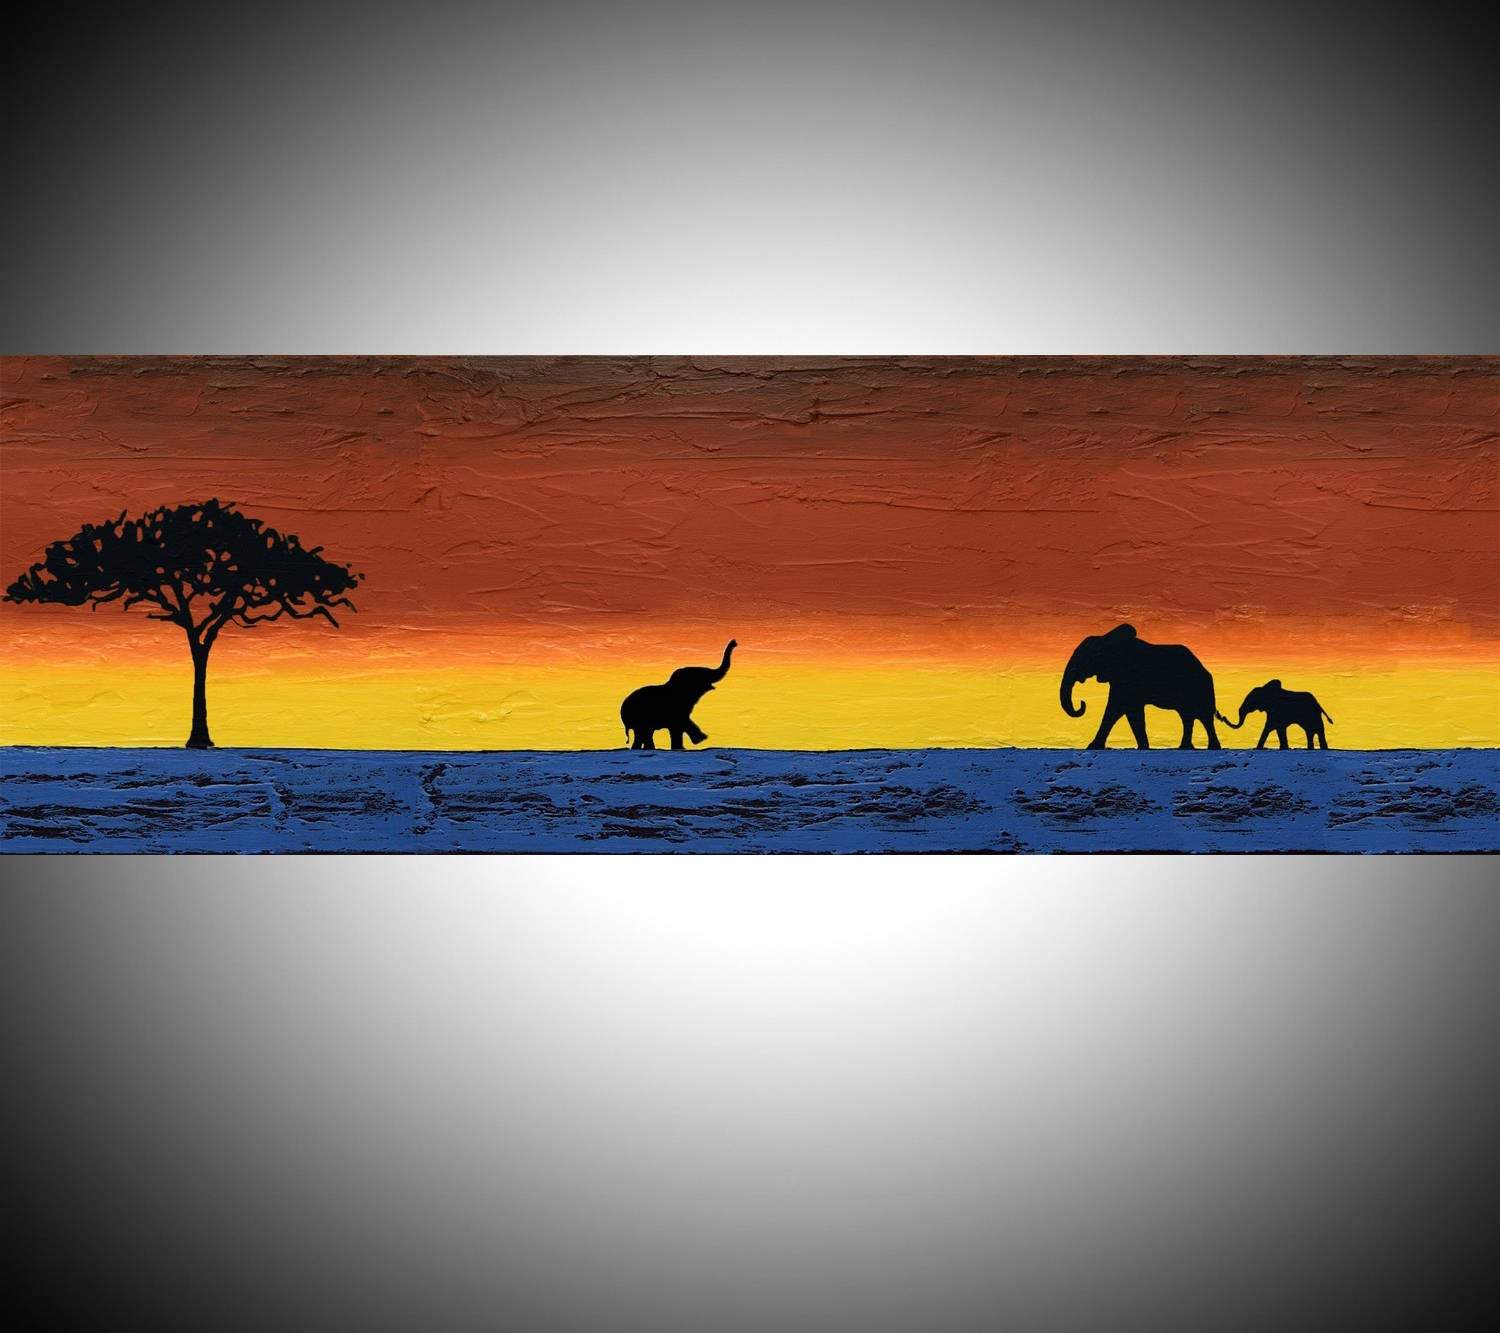 Elephants wall art "The journey home" large painting canvas